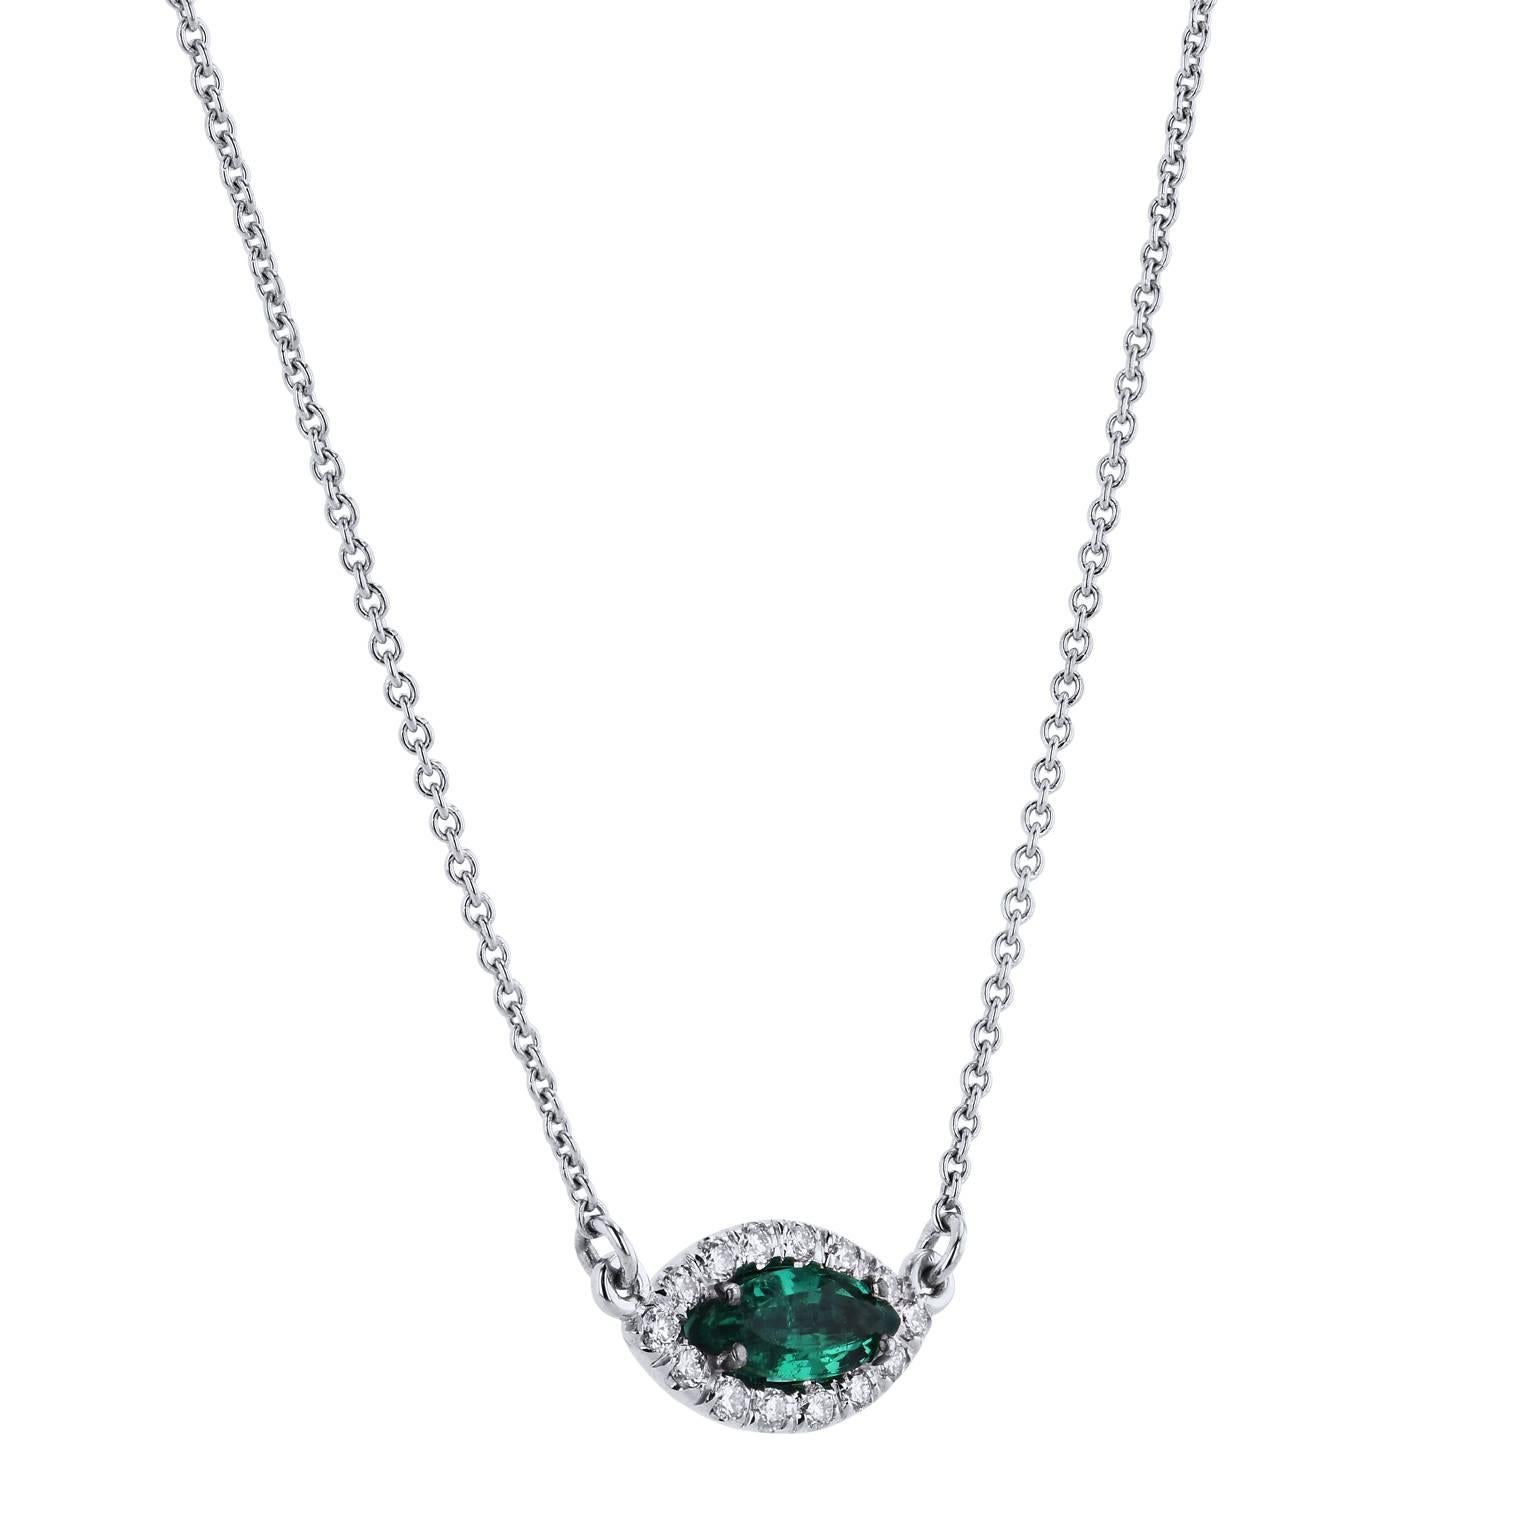 0.15 carat of pave-set diamond (G/H/SI1), affixed in 18 karat white gold, come together to form the outline for this striking handmade pendant necklace. A 0.42 carat marquise cut Zambian emerald is set at center- enrapturing one's gaze in this 18